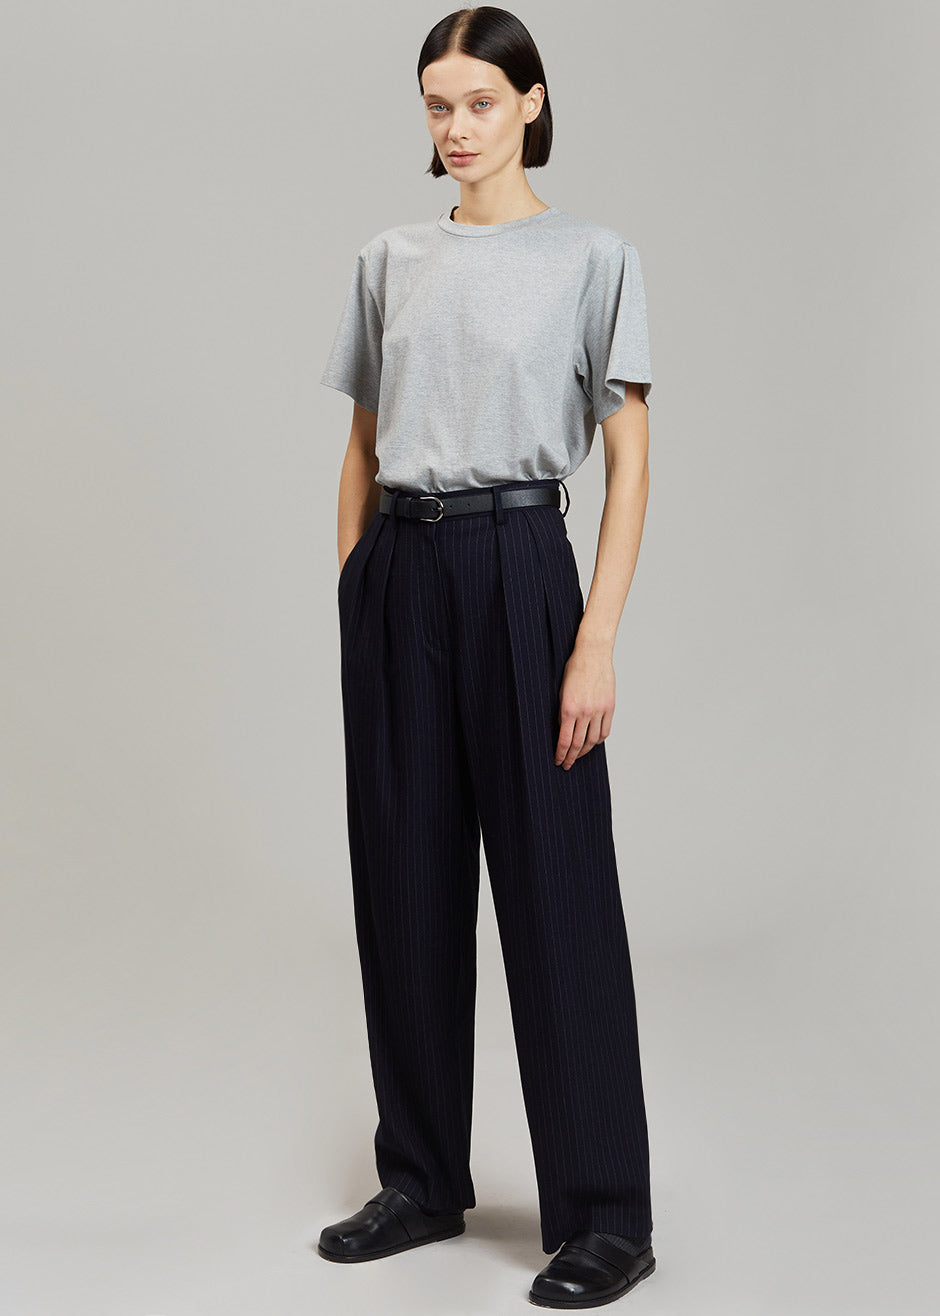 Tansy Pleated Trousers - Navy Pinstripe